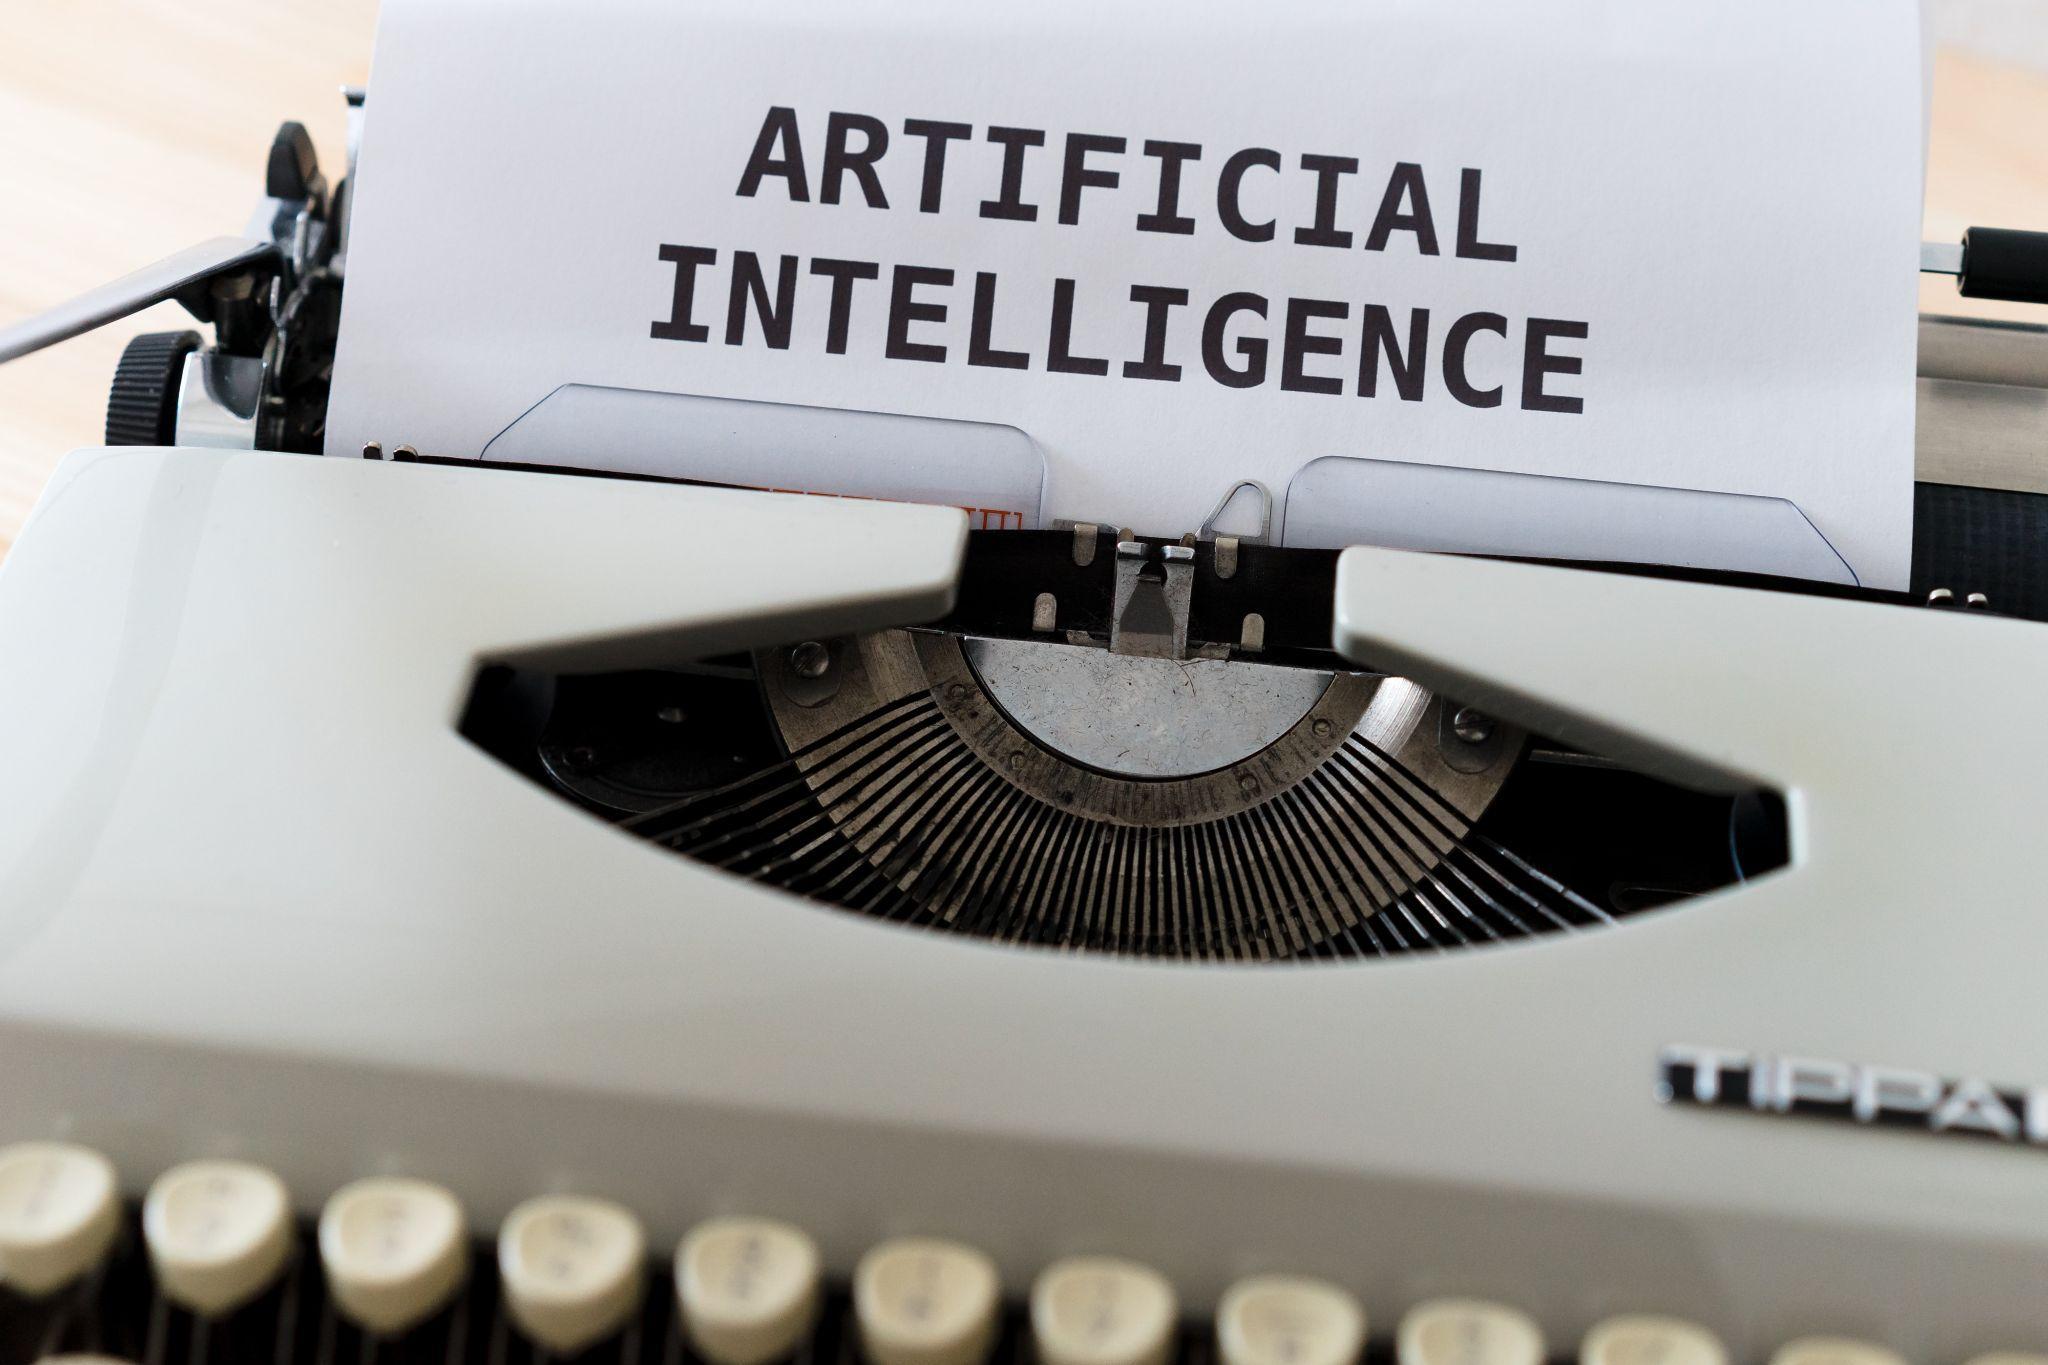 A white typewriter with paper in it bearing the words "ARTIFICIAL INTELLIGENCE" in black font.